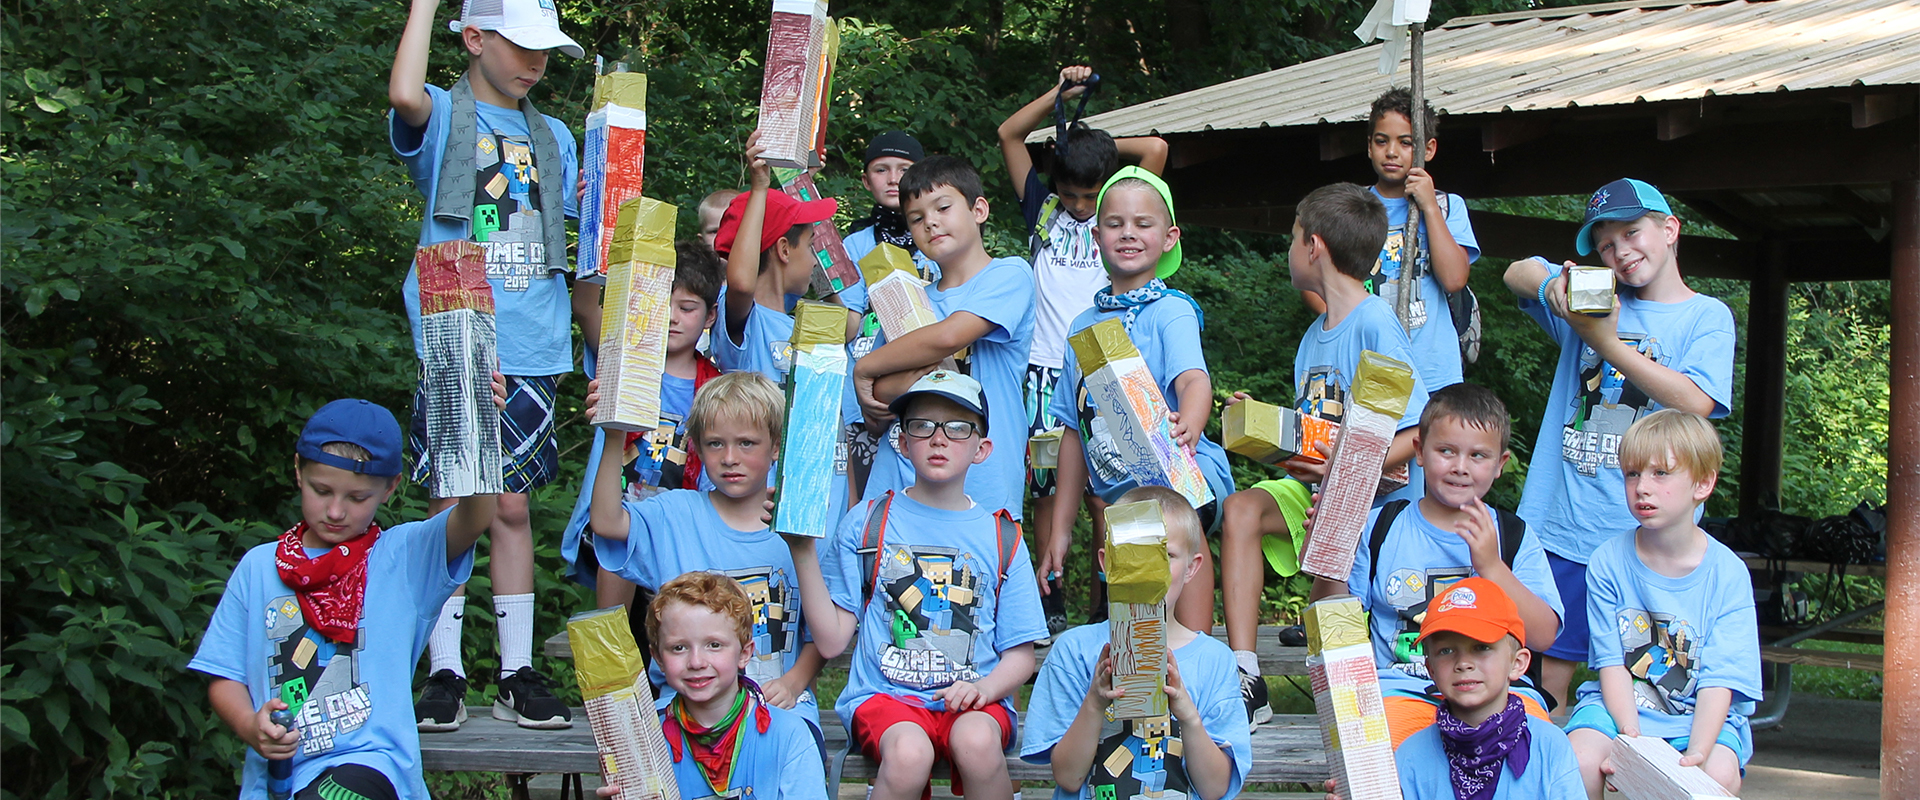 Kids Activities & Day Camps St. Louis Area Boy Scouts